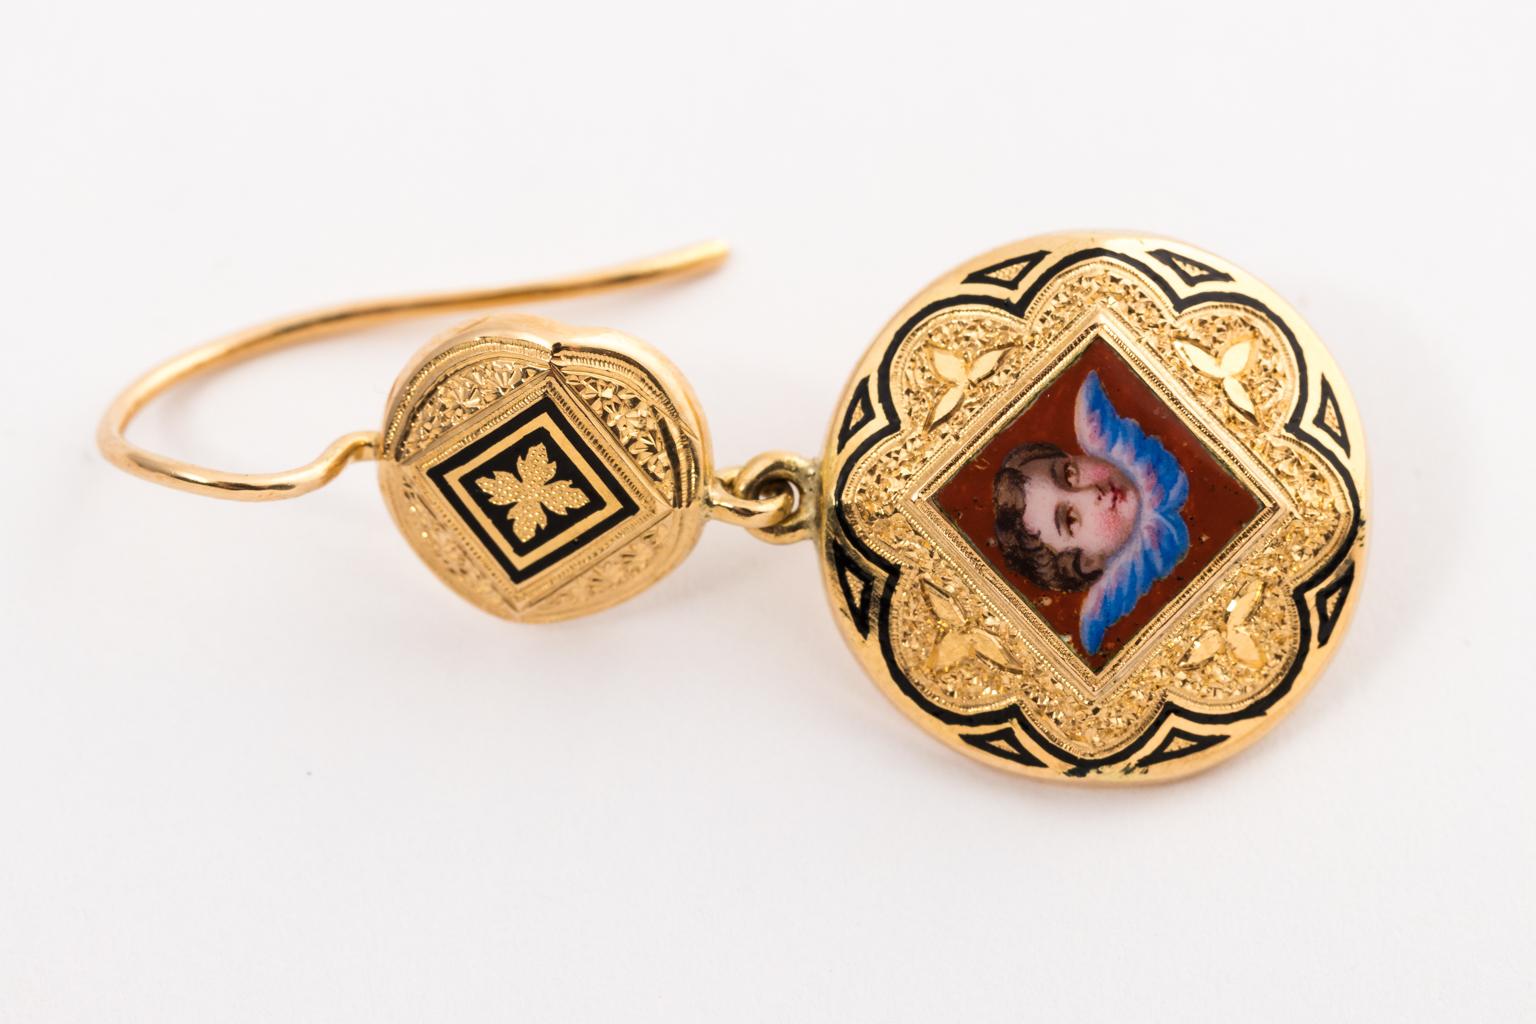 Circa late 1800's 18K Gold and Enamel painted Brooch and Earring set in original box. Made in Switzerland. The earrings measure 1.50 Inches long with a weight of 4.90 Grams. The brooch weighs 5.50 Grams and measures 1.50 Inches wide by 1.50 Inches